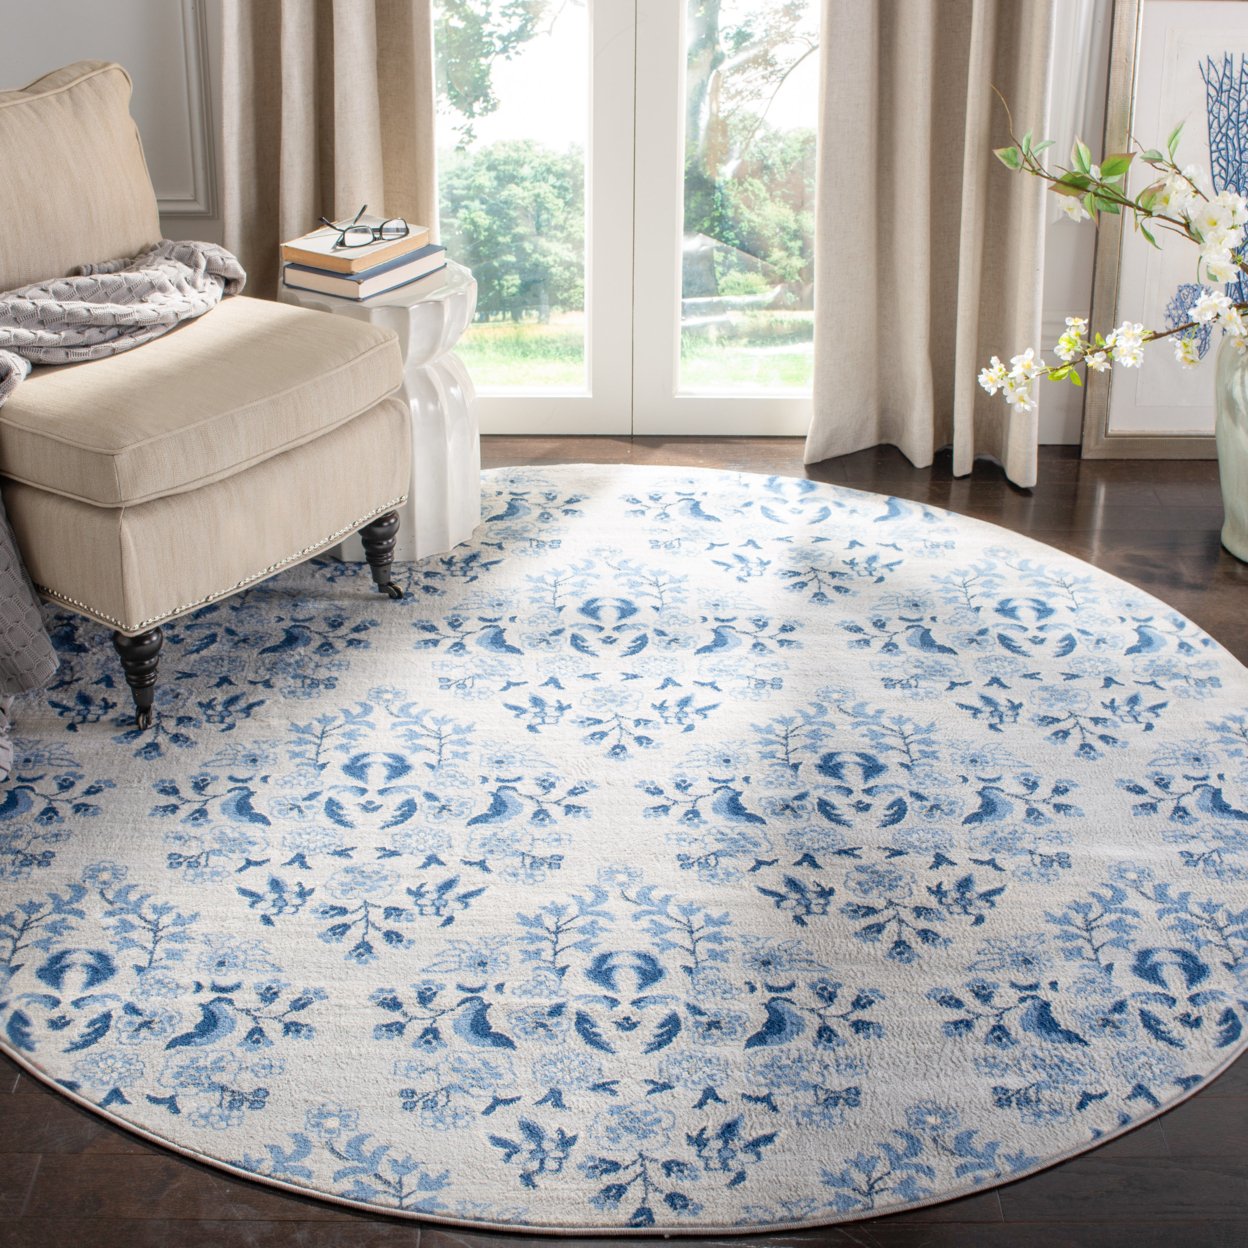 SAFAVIEH Brentwood Collection BNT856D Cream / Blue Rug - 4' X 6'